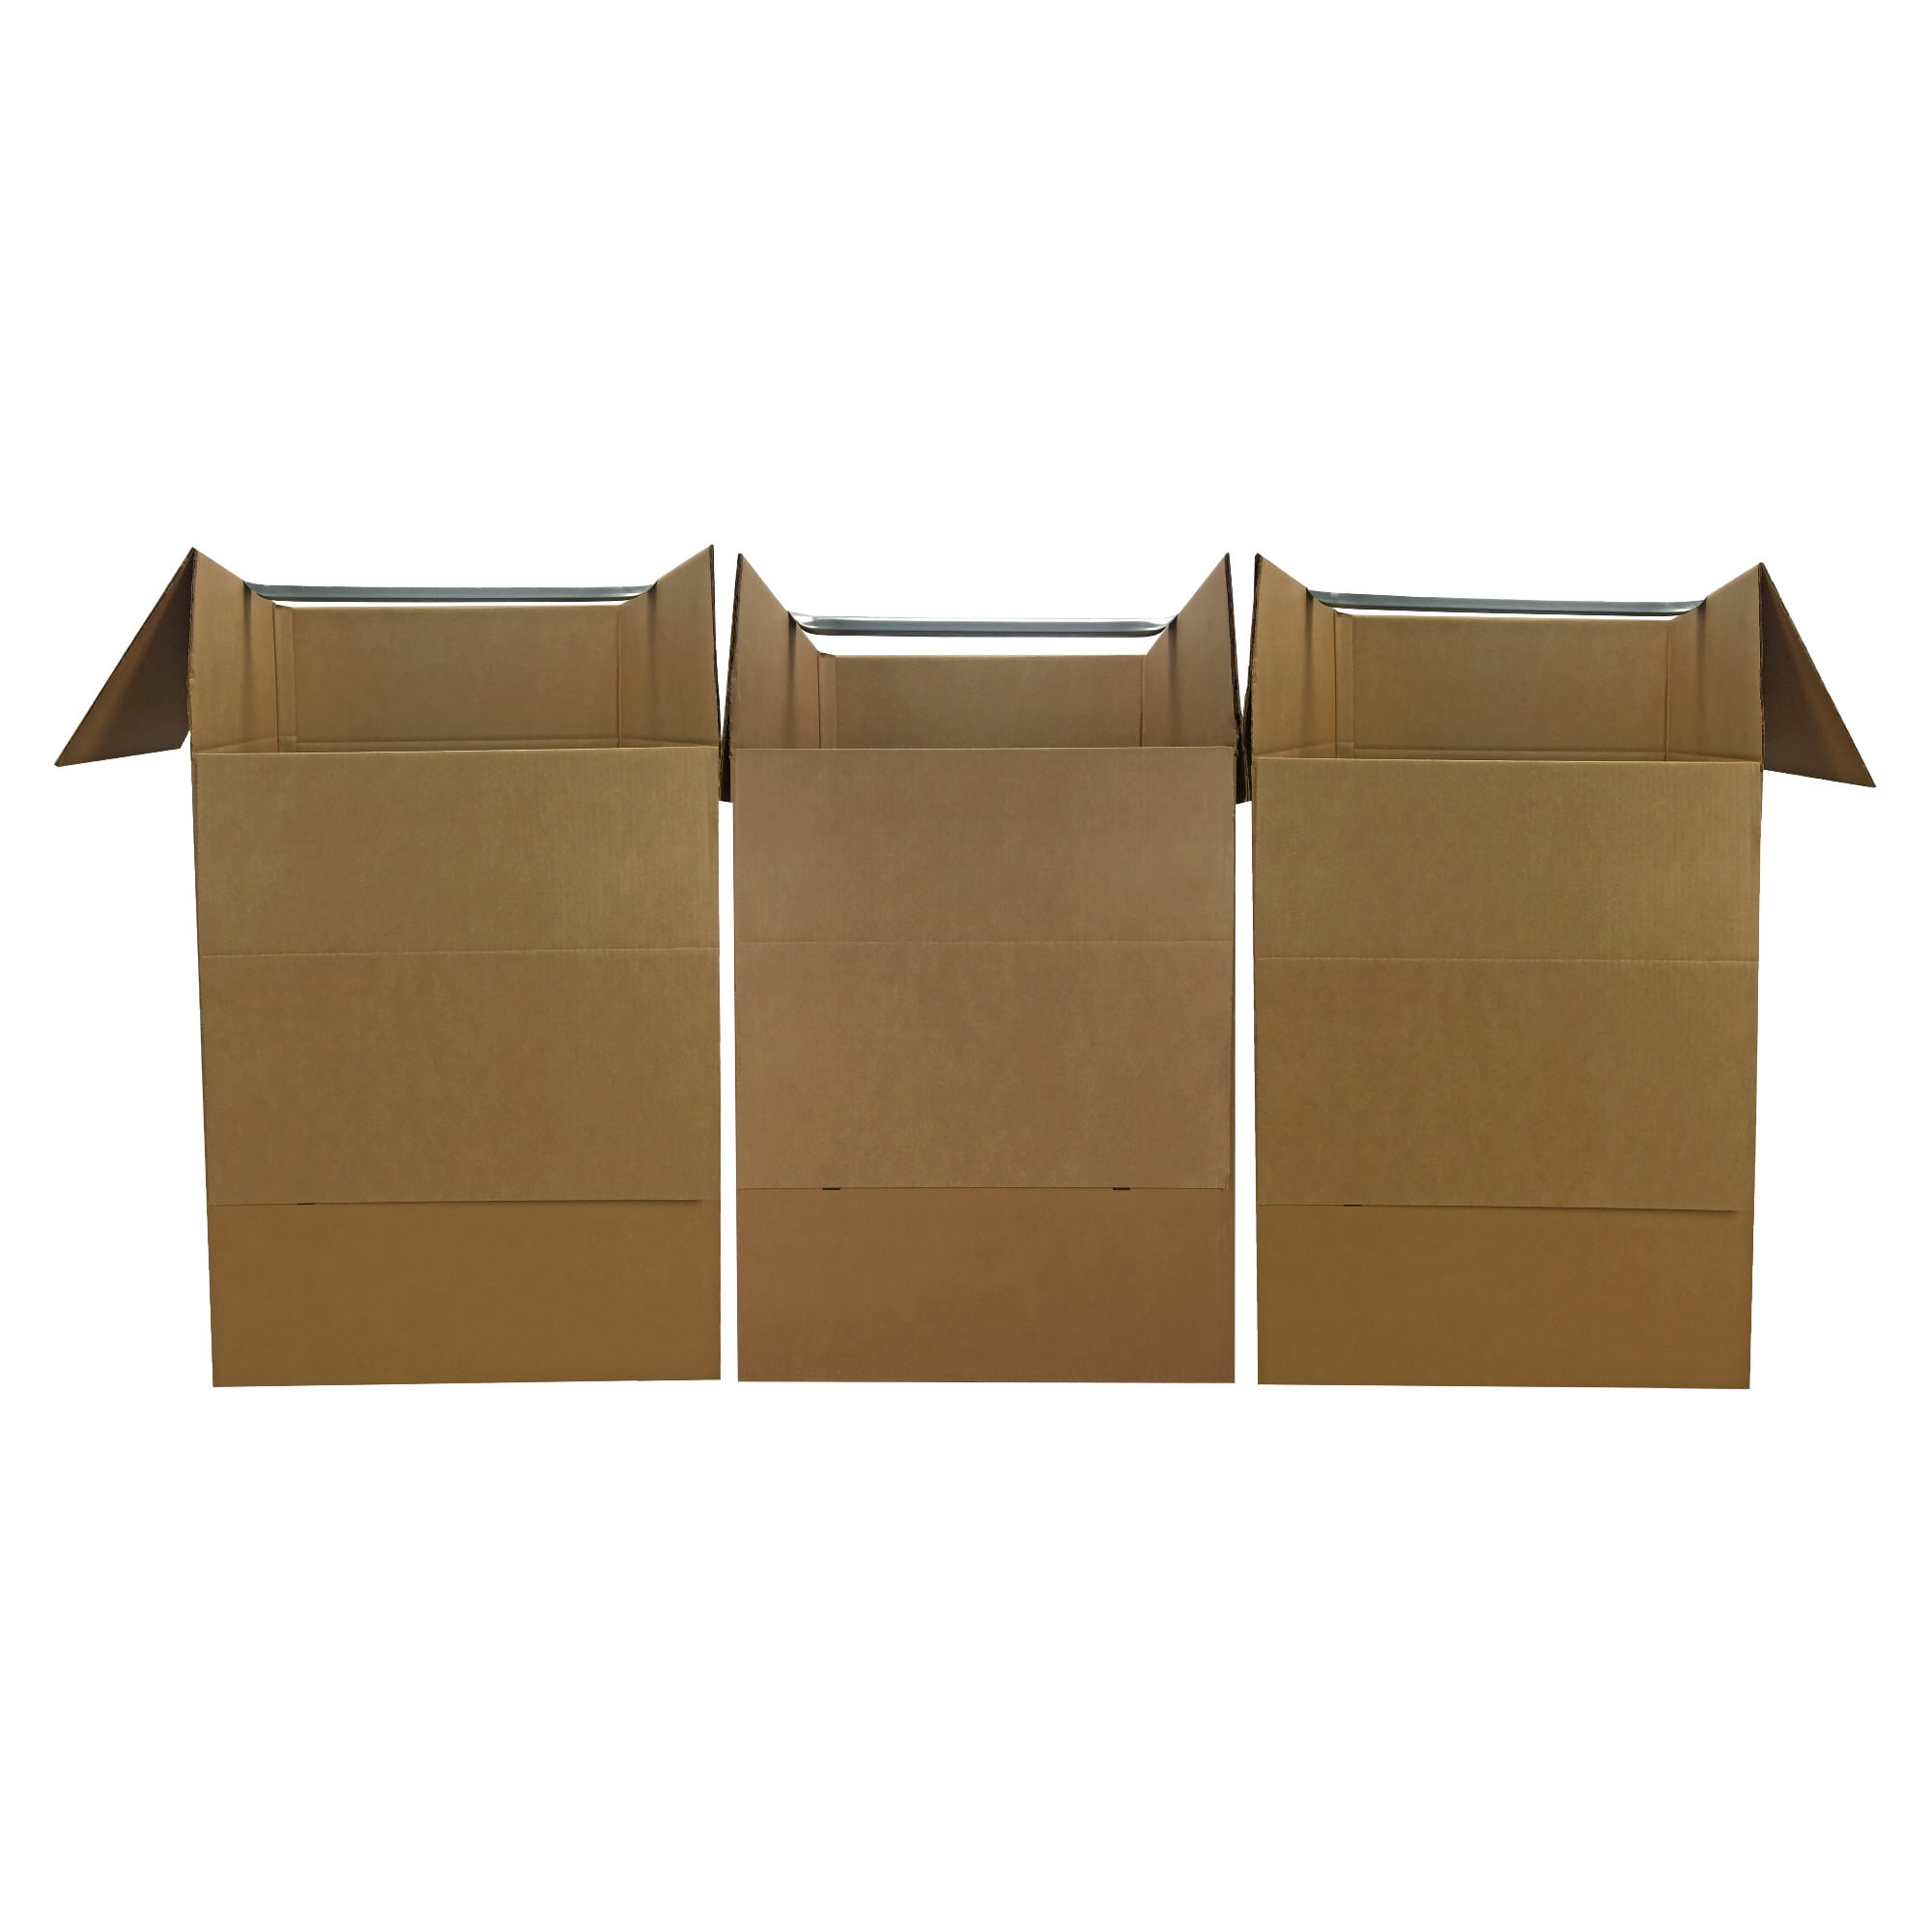 Uboxes Large Corrugated Wardrobe 24 In. X 24 In. X 40 In. Moving